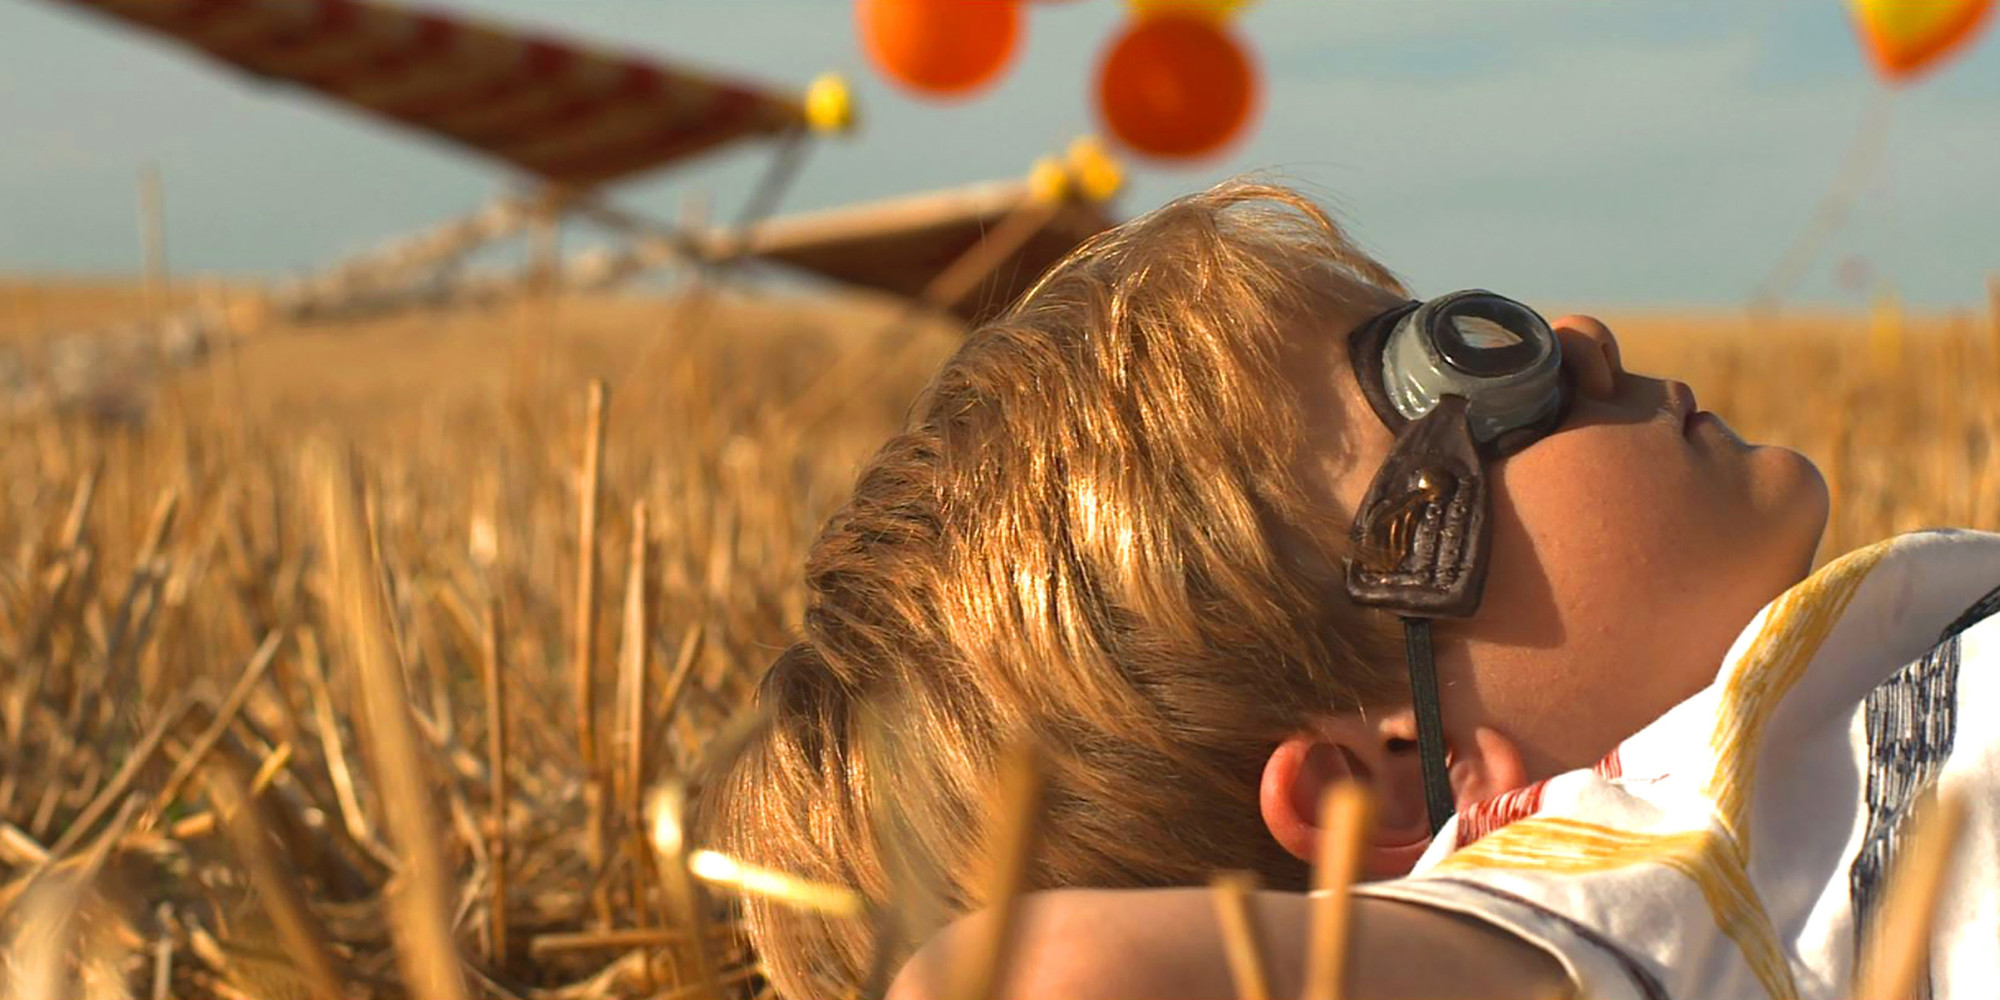 Benny and Jack’s Flying Machine. 2012. Great Britain. Directed by Krysten Resnick. Courtesy the filmmaker